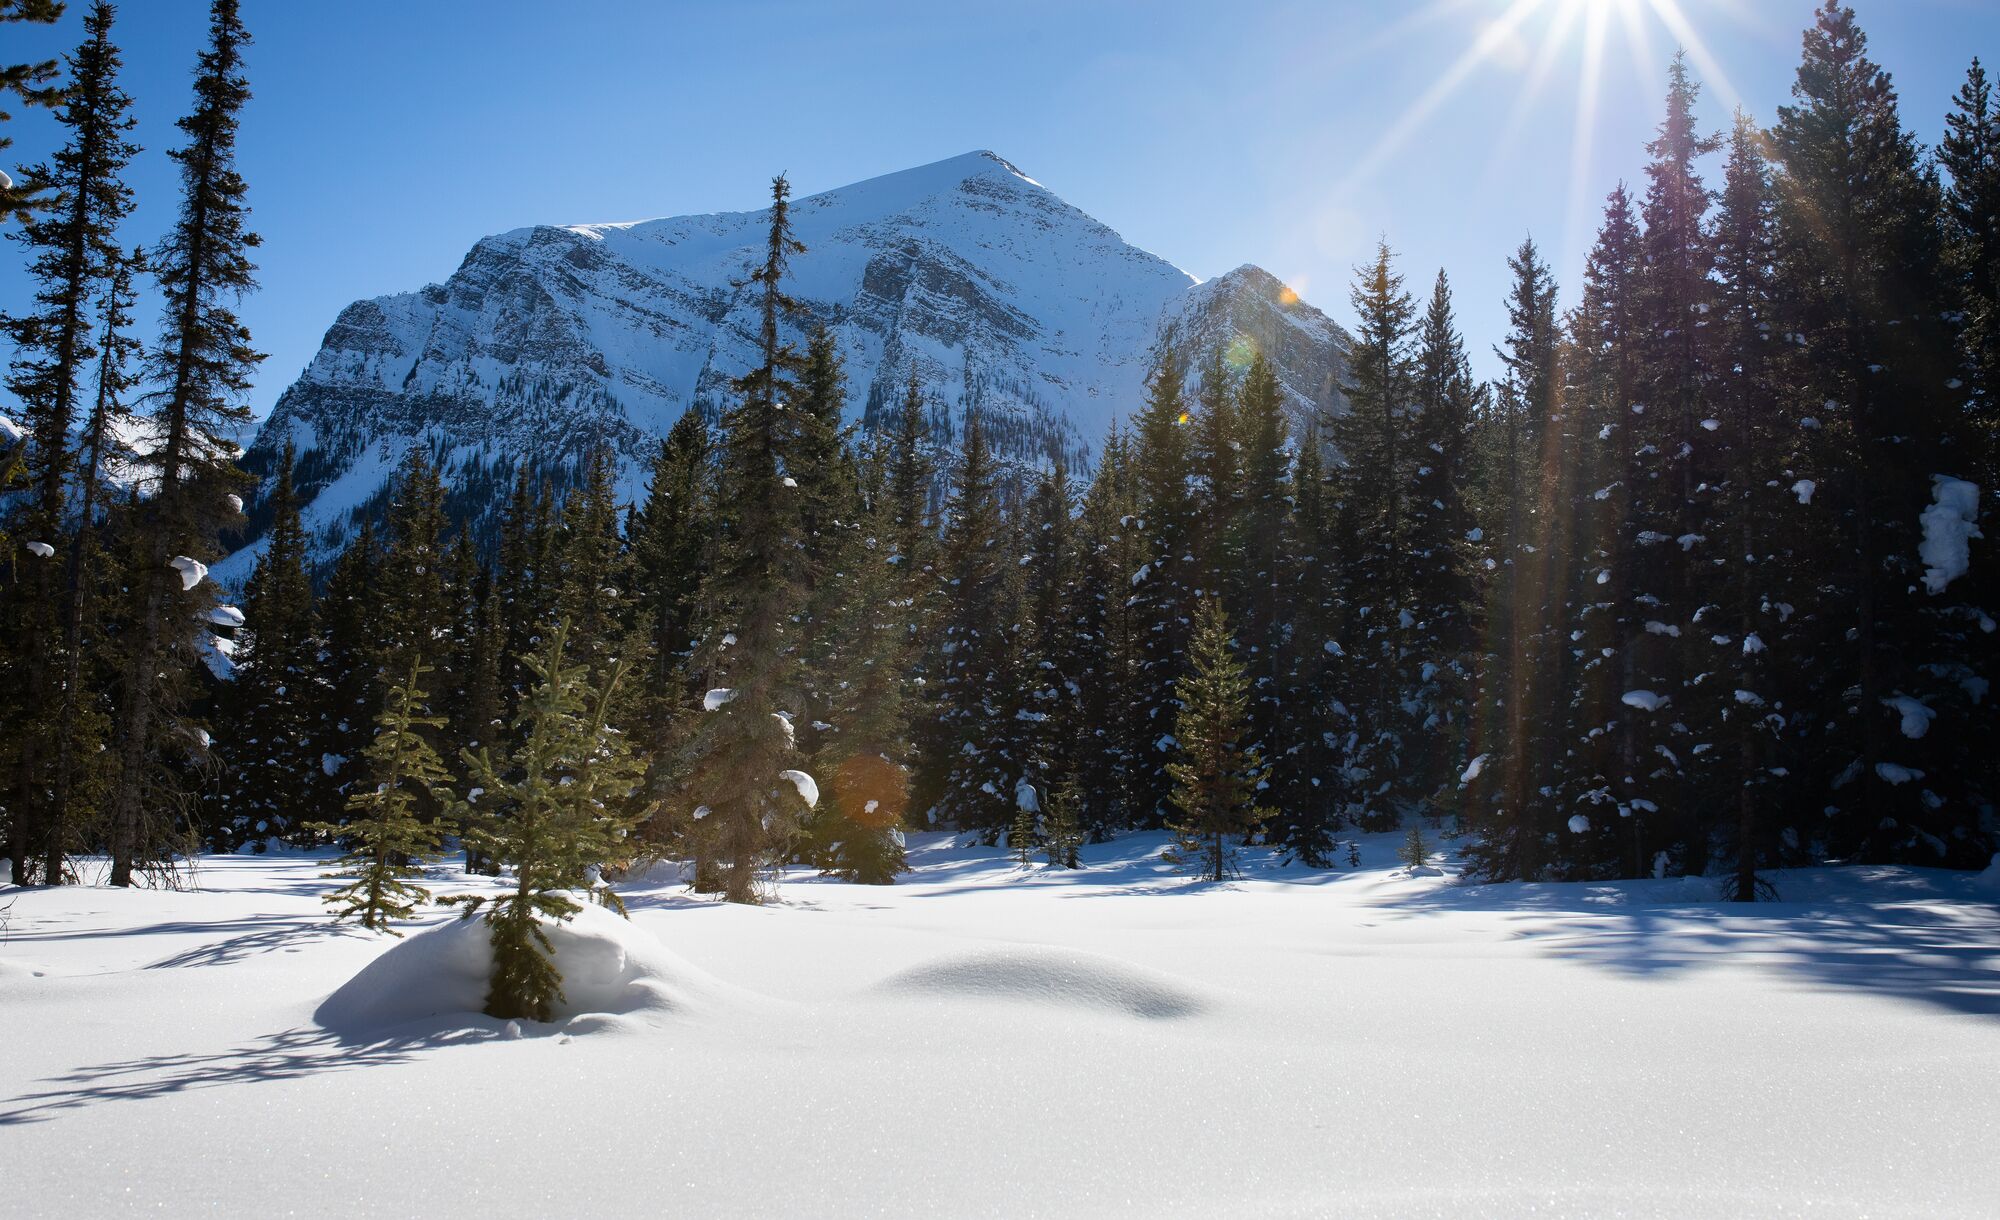 A view of Mount Fairview from the Great Divide Trail in Banff National Park.